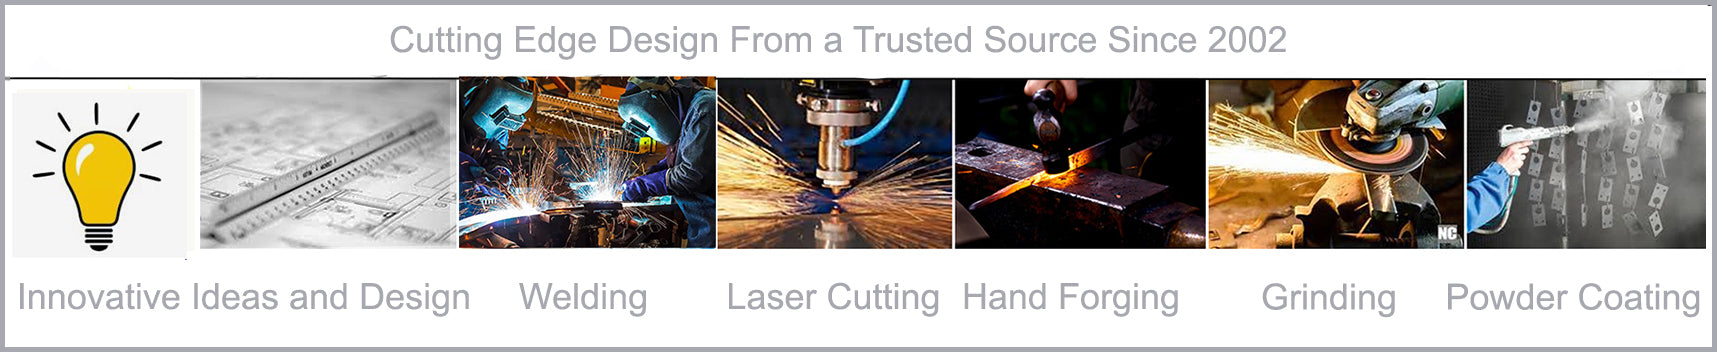 A row of thumbnails of Wild West Hardware's expertise, including innovative ideas and design, welding, laser cutting, hand forging, grinding, and powder coating.